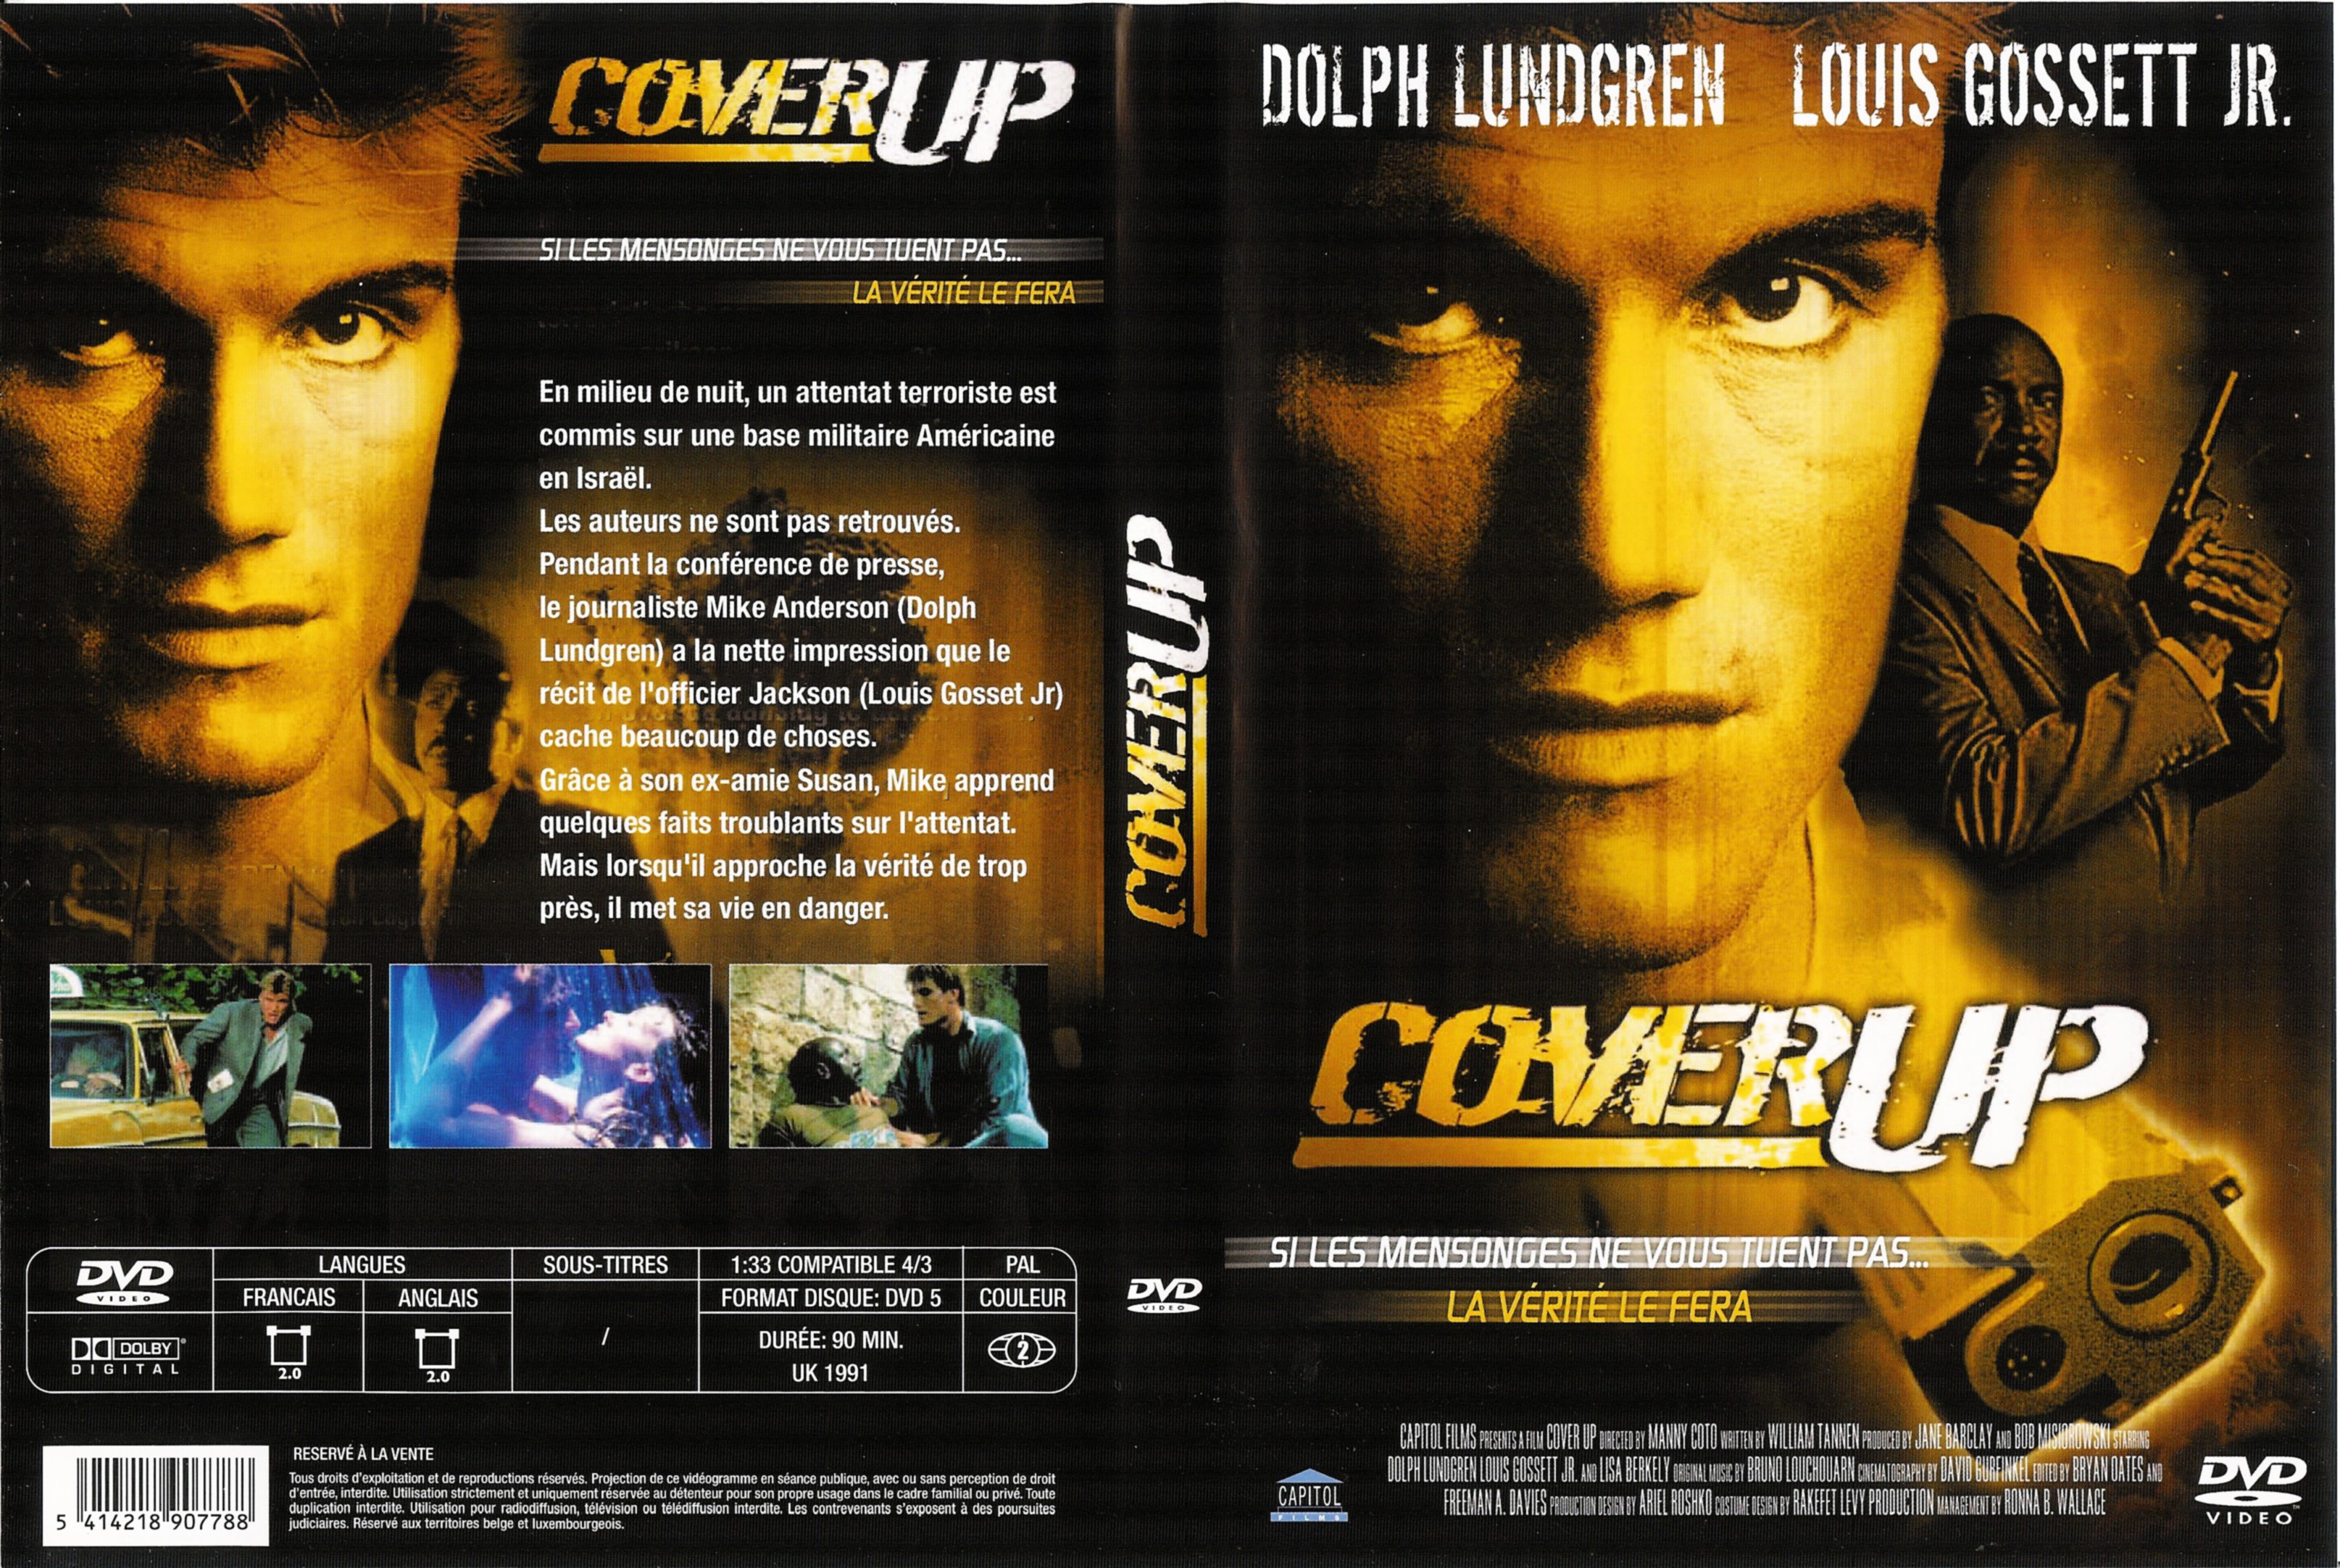 Jaquette DVD Cover up v2